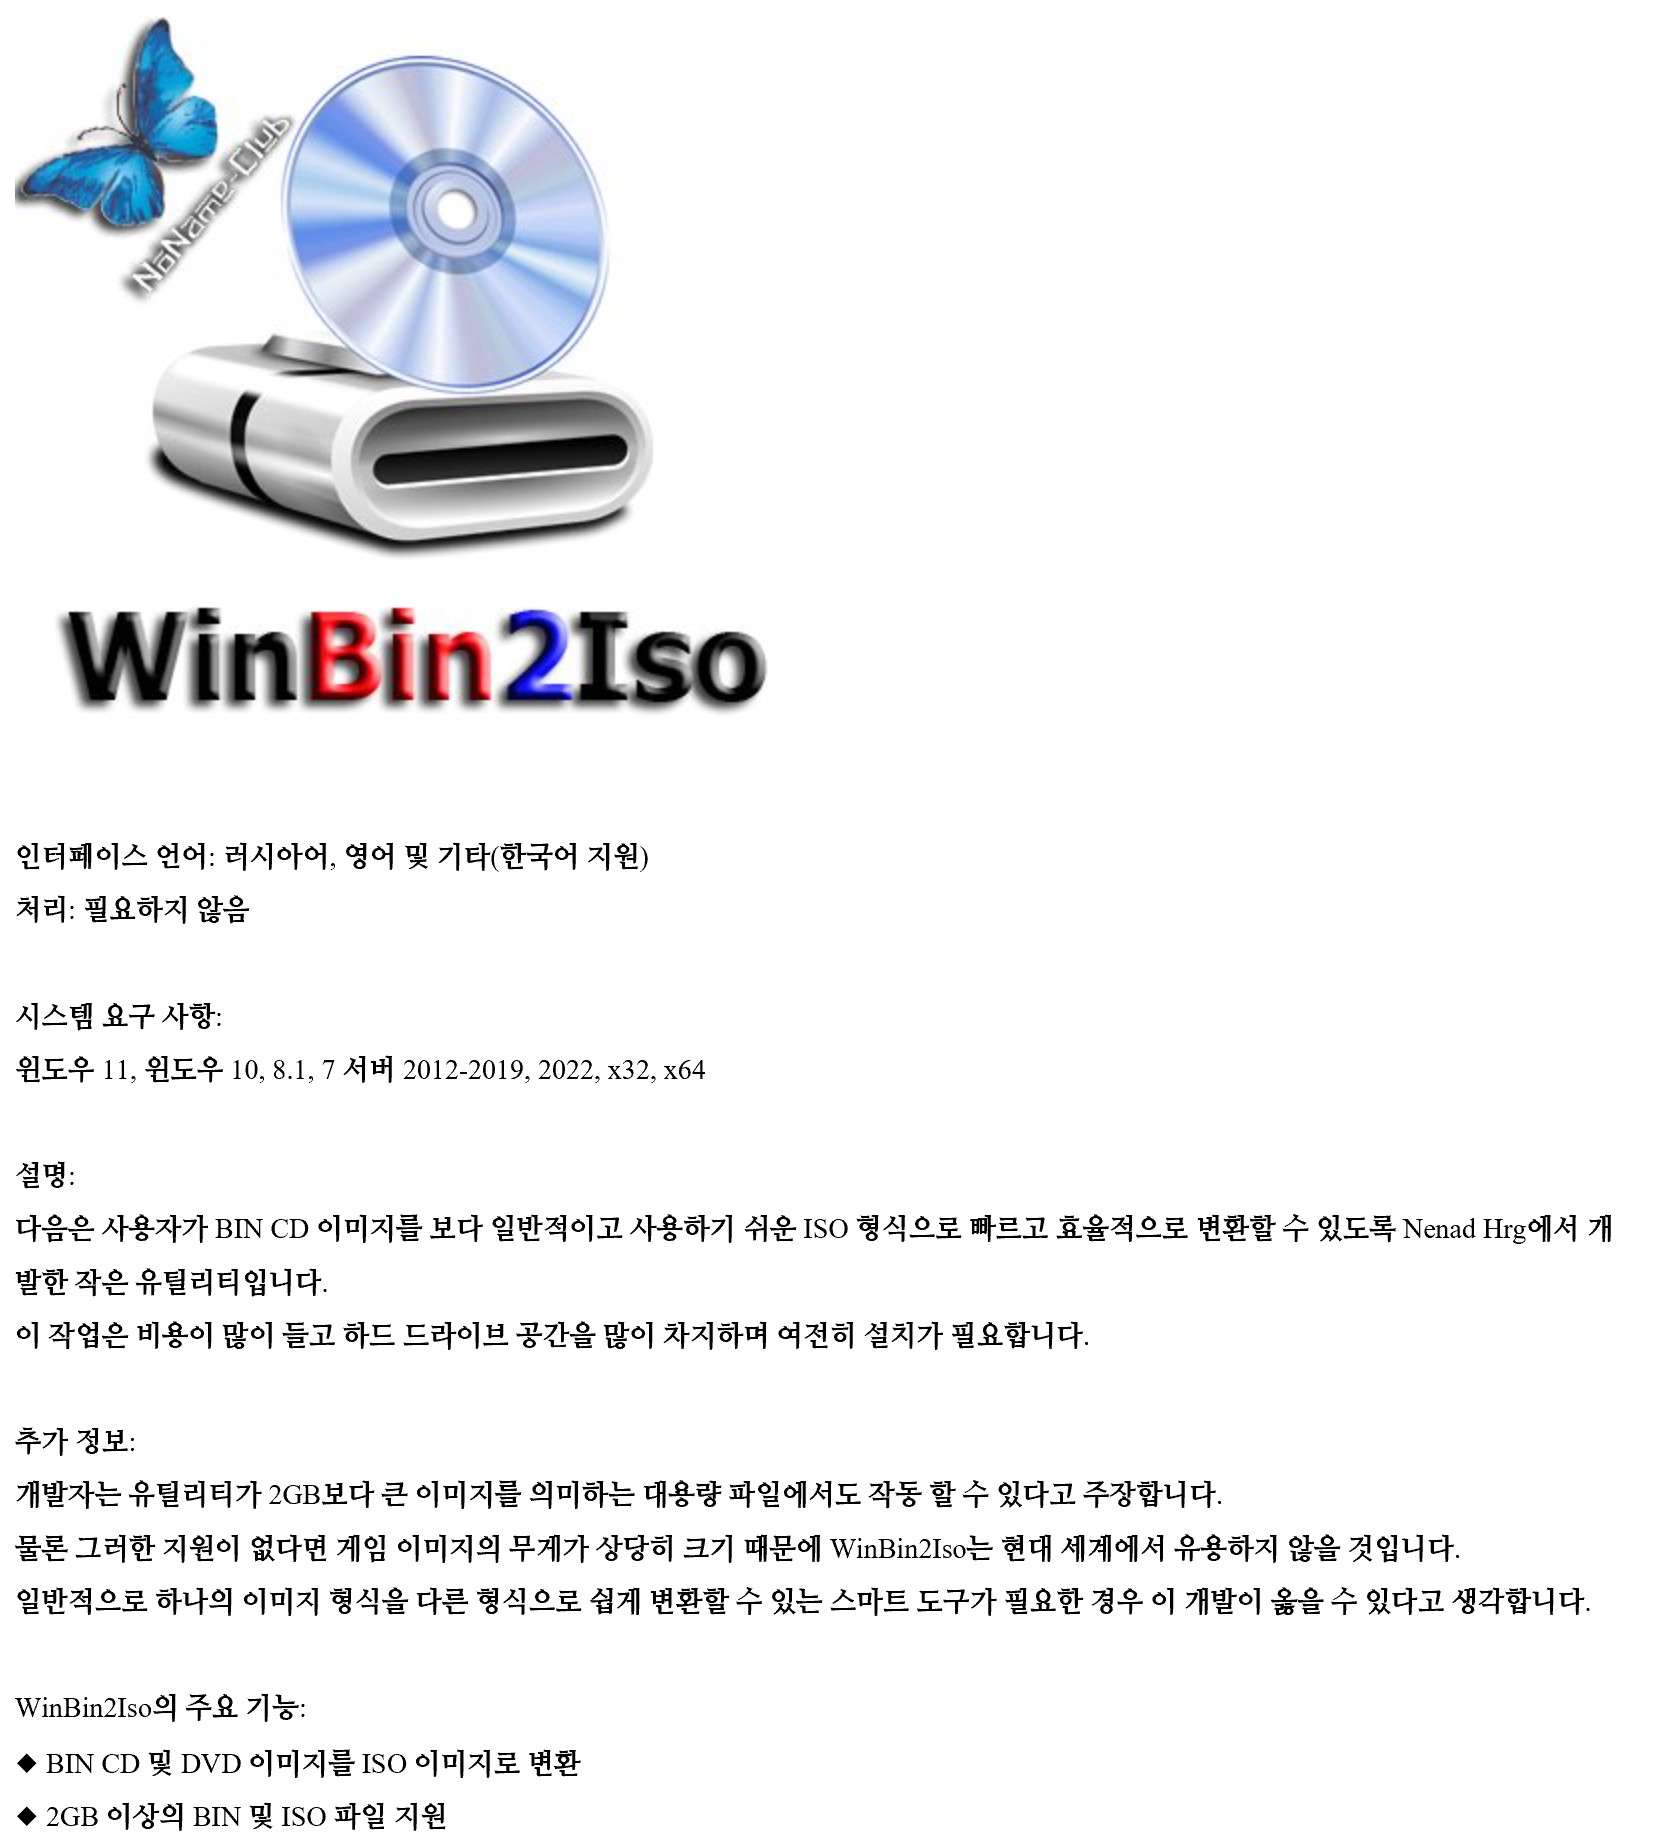 WinBin2Iso 6.21 instal the last version for iphone